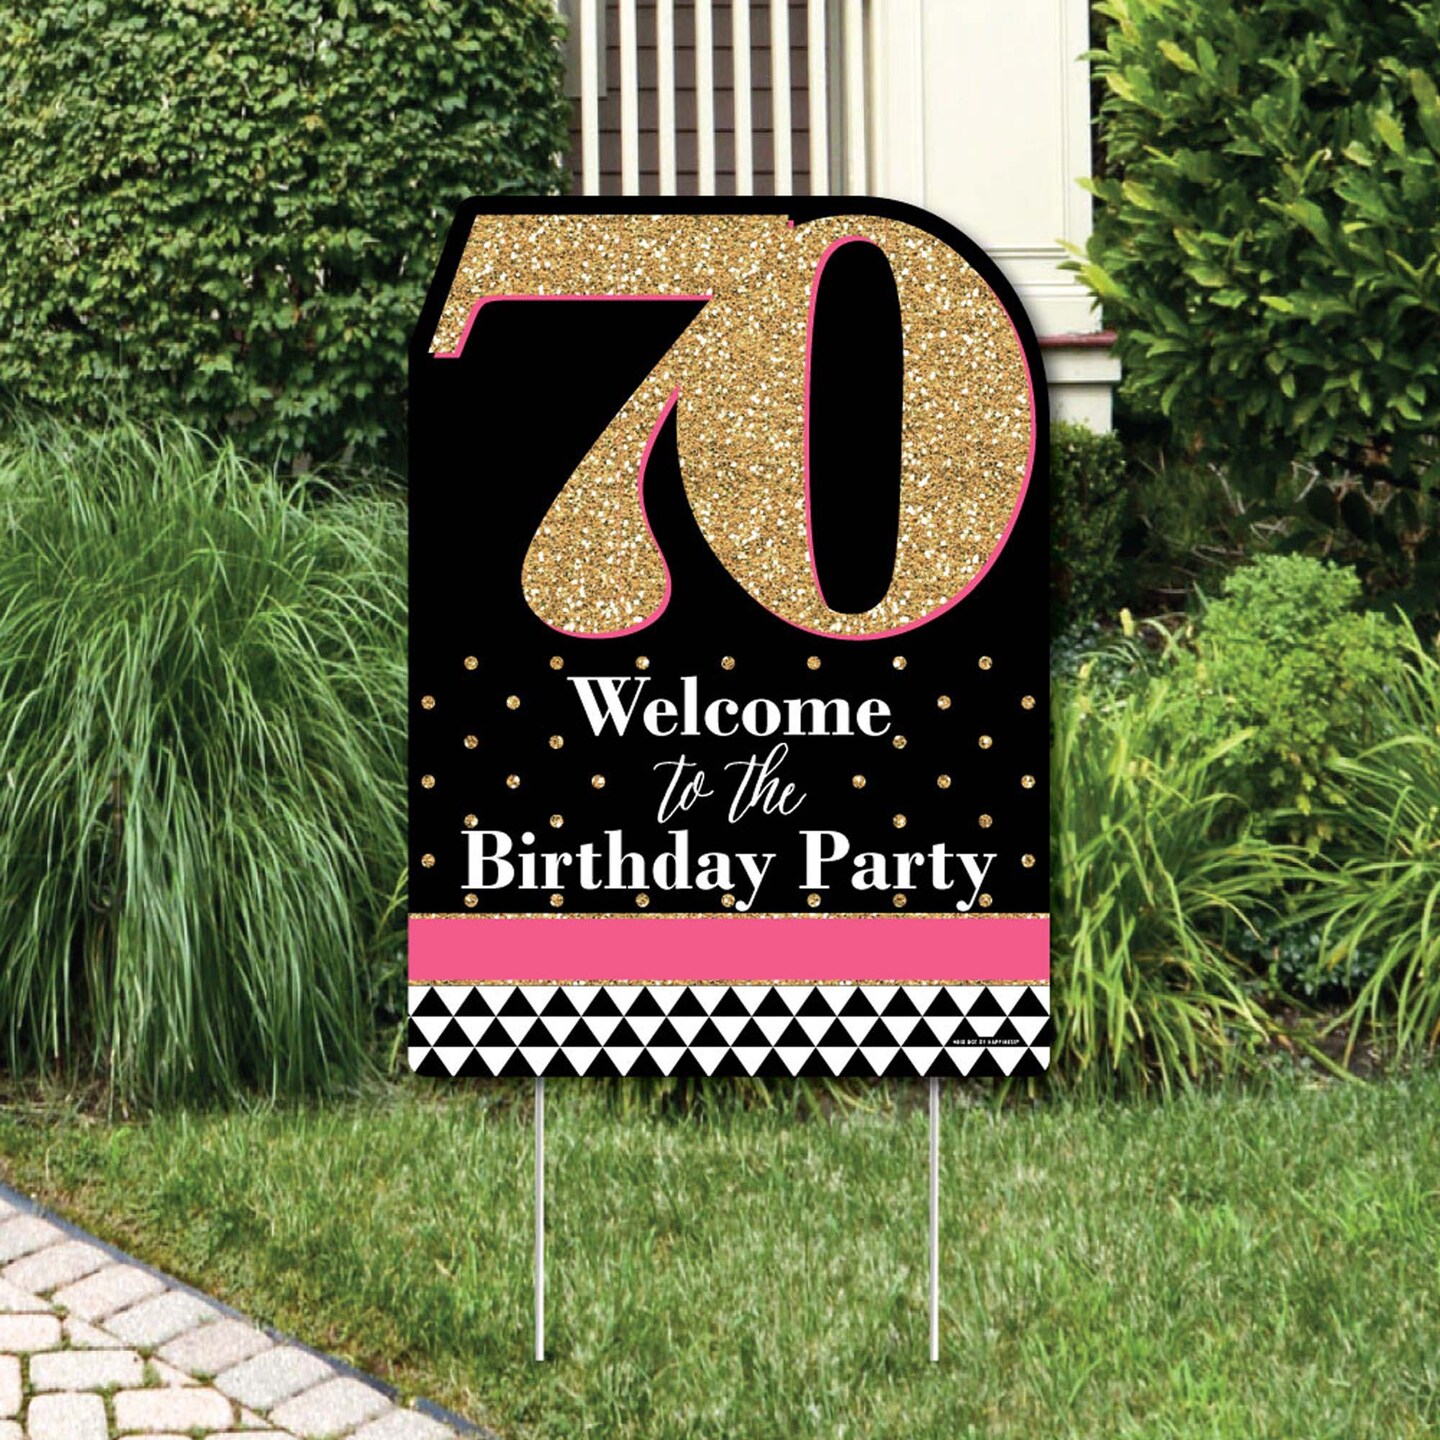 Big Dot of Happiness Chic 70th Birthday - Pink, Black and Gold - Party Decorations - Birthday Party Welcome Yard Sign